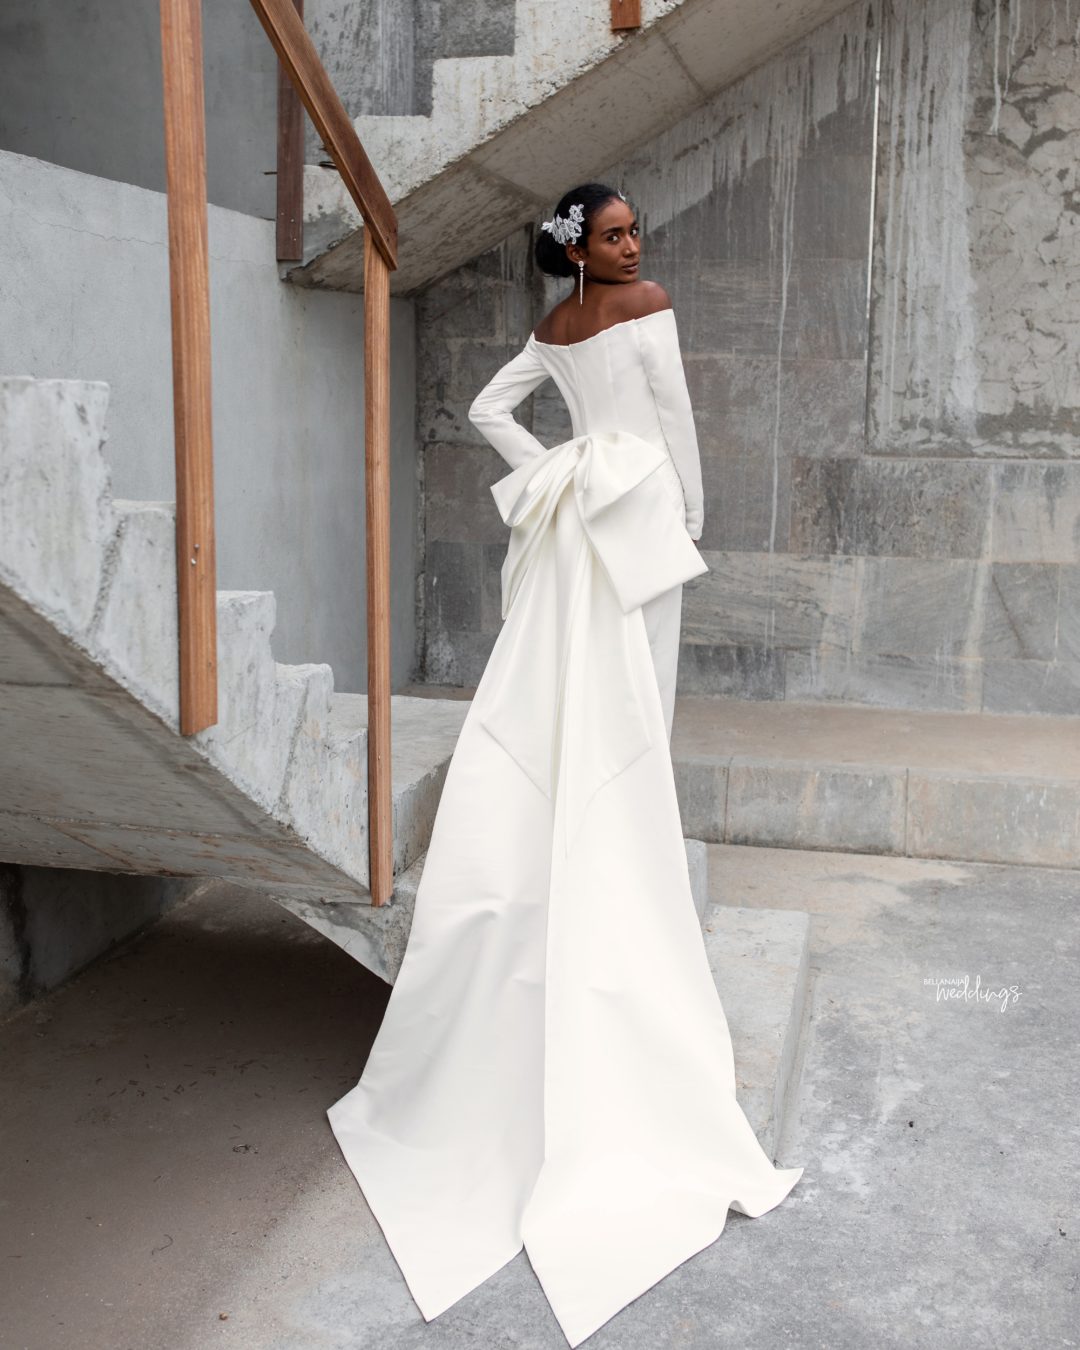 We Can't Help but Love This Andrea Iyamah Bridal Collection